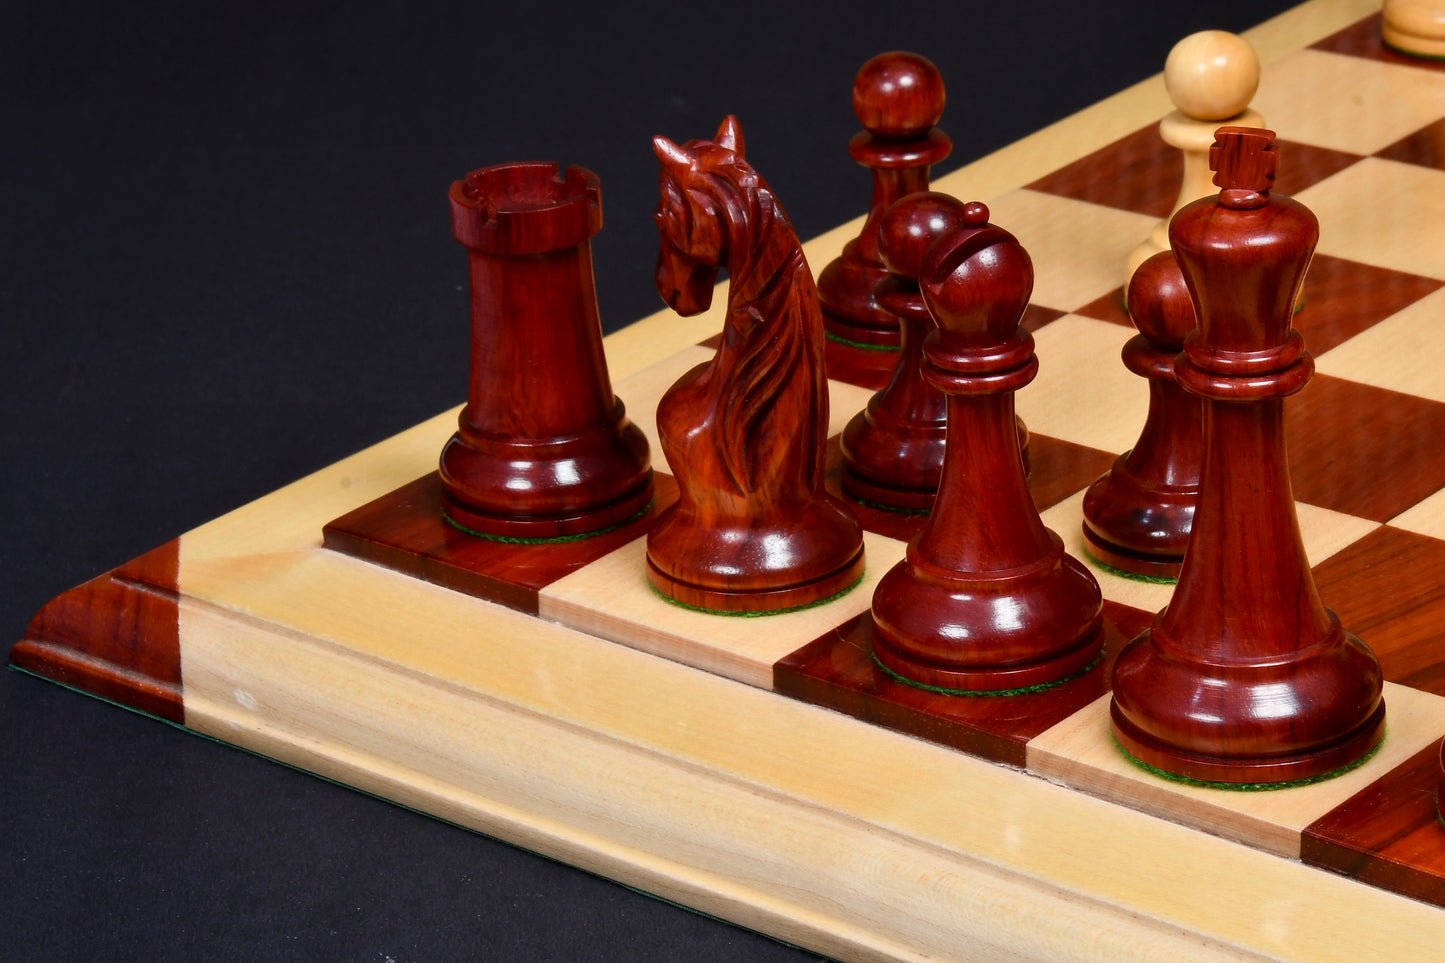 Reproduced 1963-1966 Piatigorsky Cup Chess Pieces in Bud Rose / Box Wood - 4.2" King